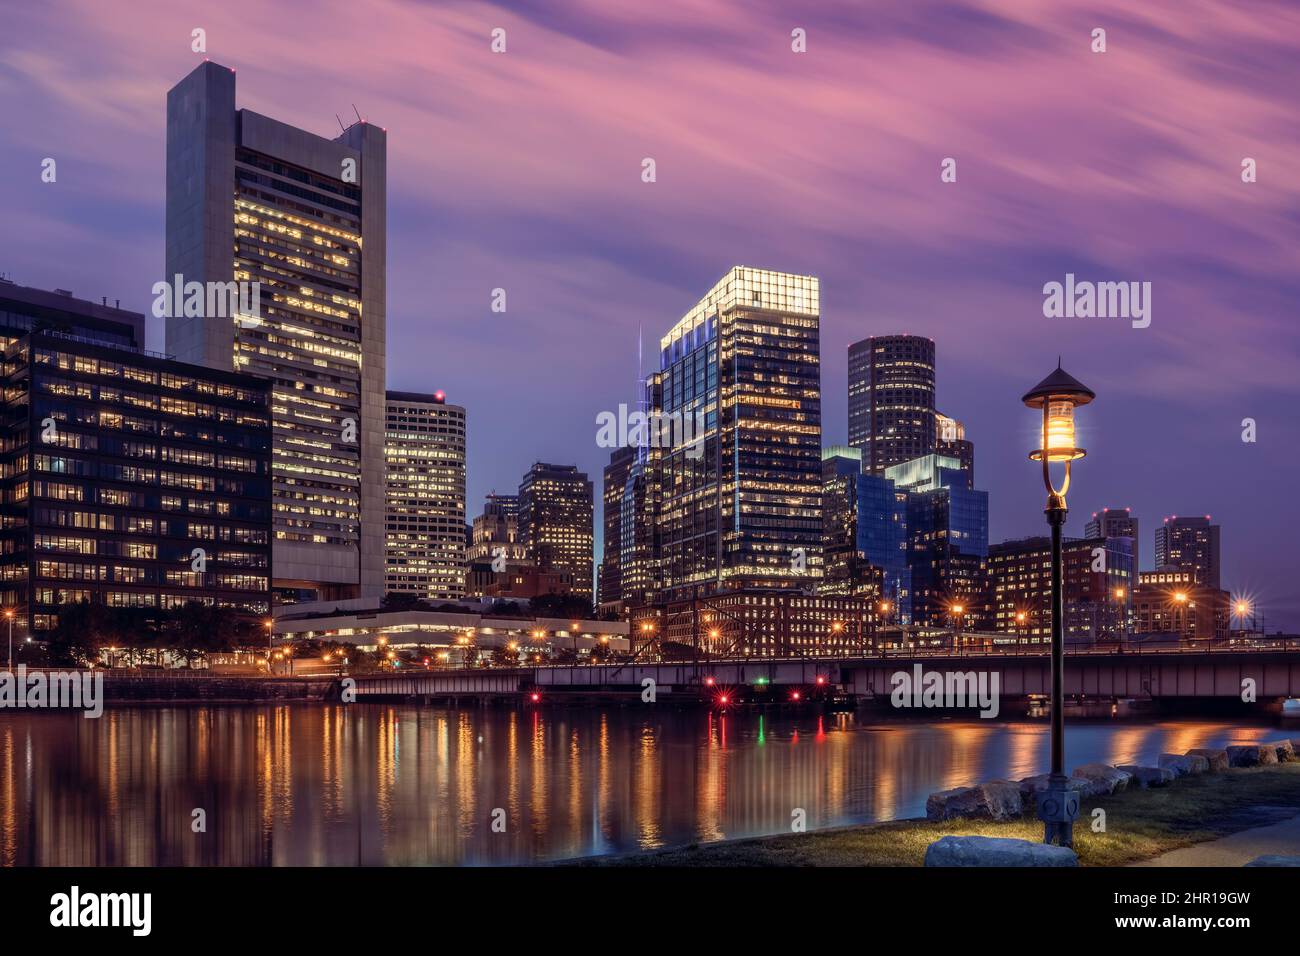 The early evening lights of the financial district of Boston reflect across the waters of the Fort Point Channel. Boston, Massachusetts - USA Stock Photo